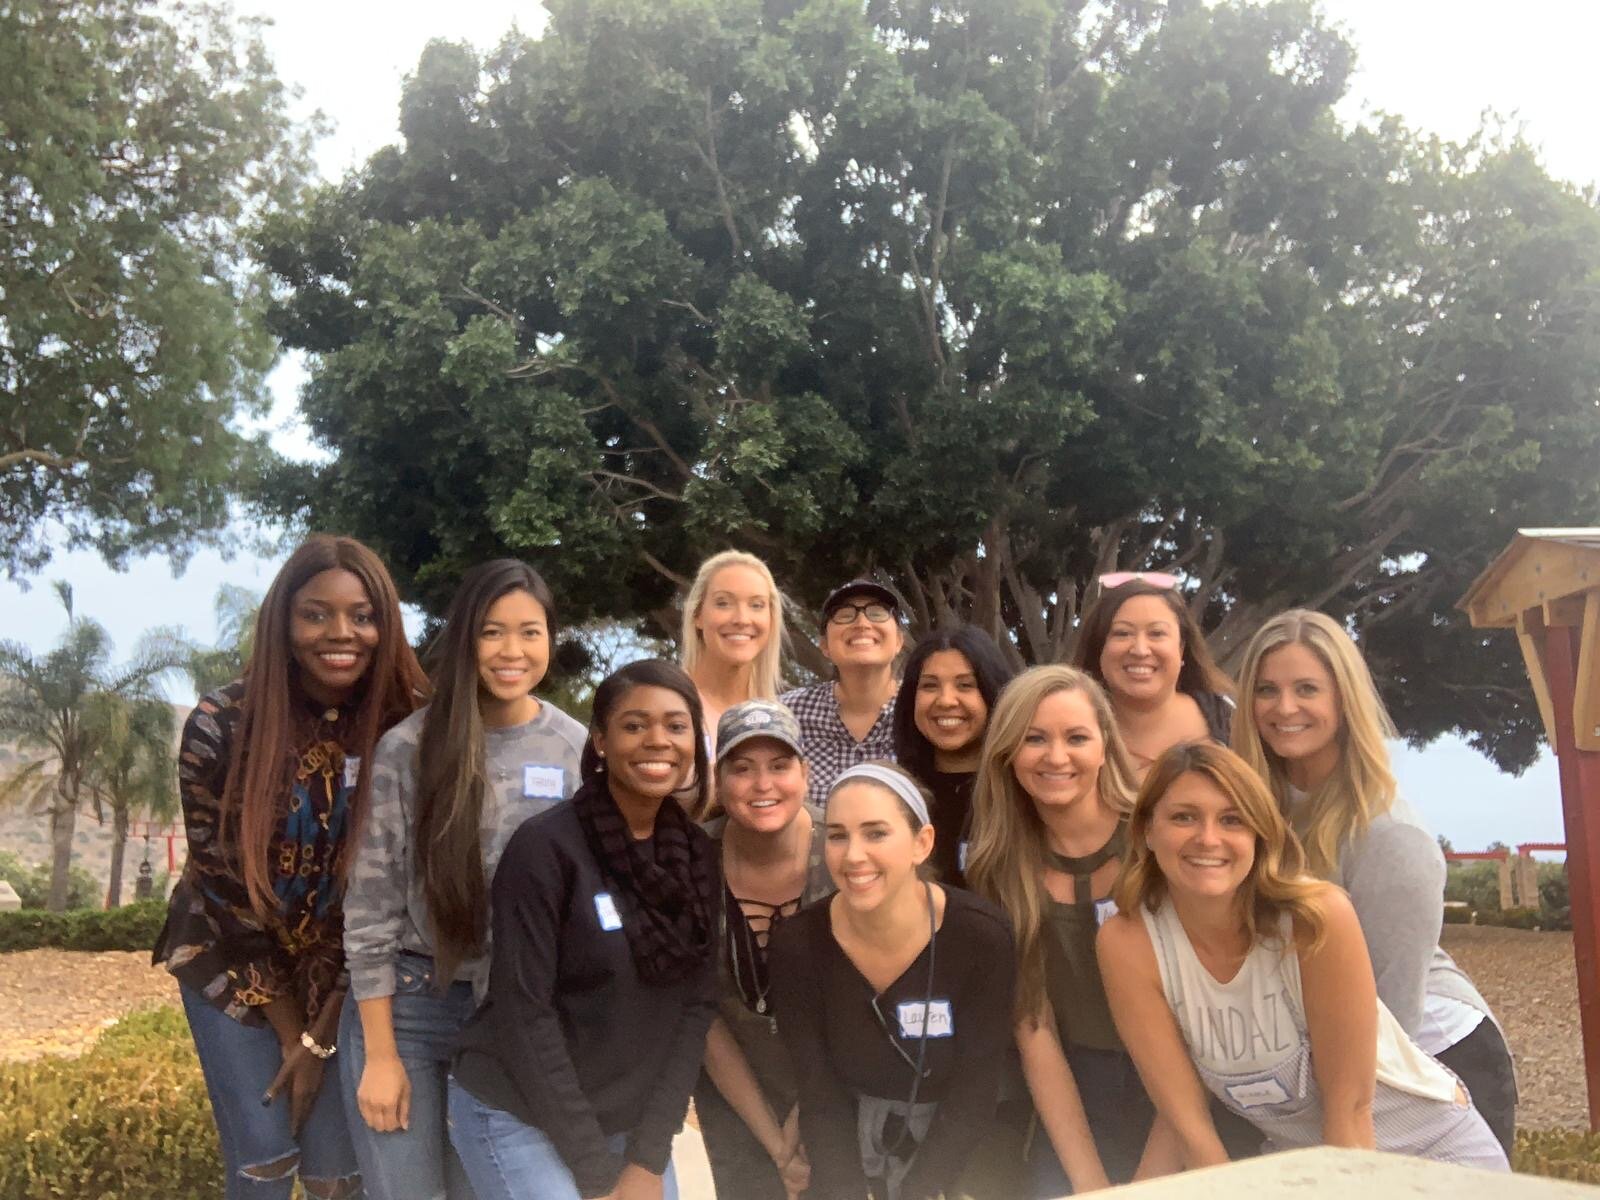  During week of the program, the group participated in a serve experience at Camp Pendleton. 